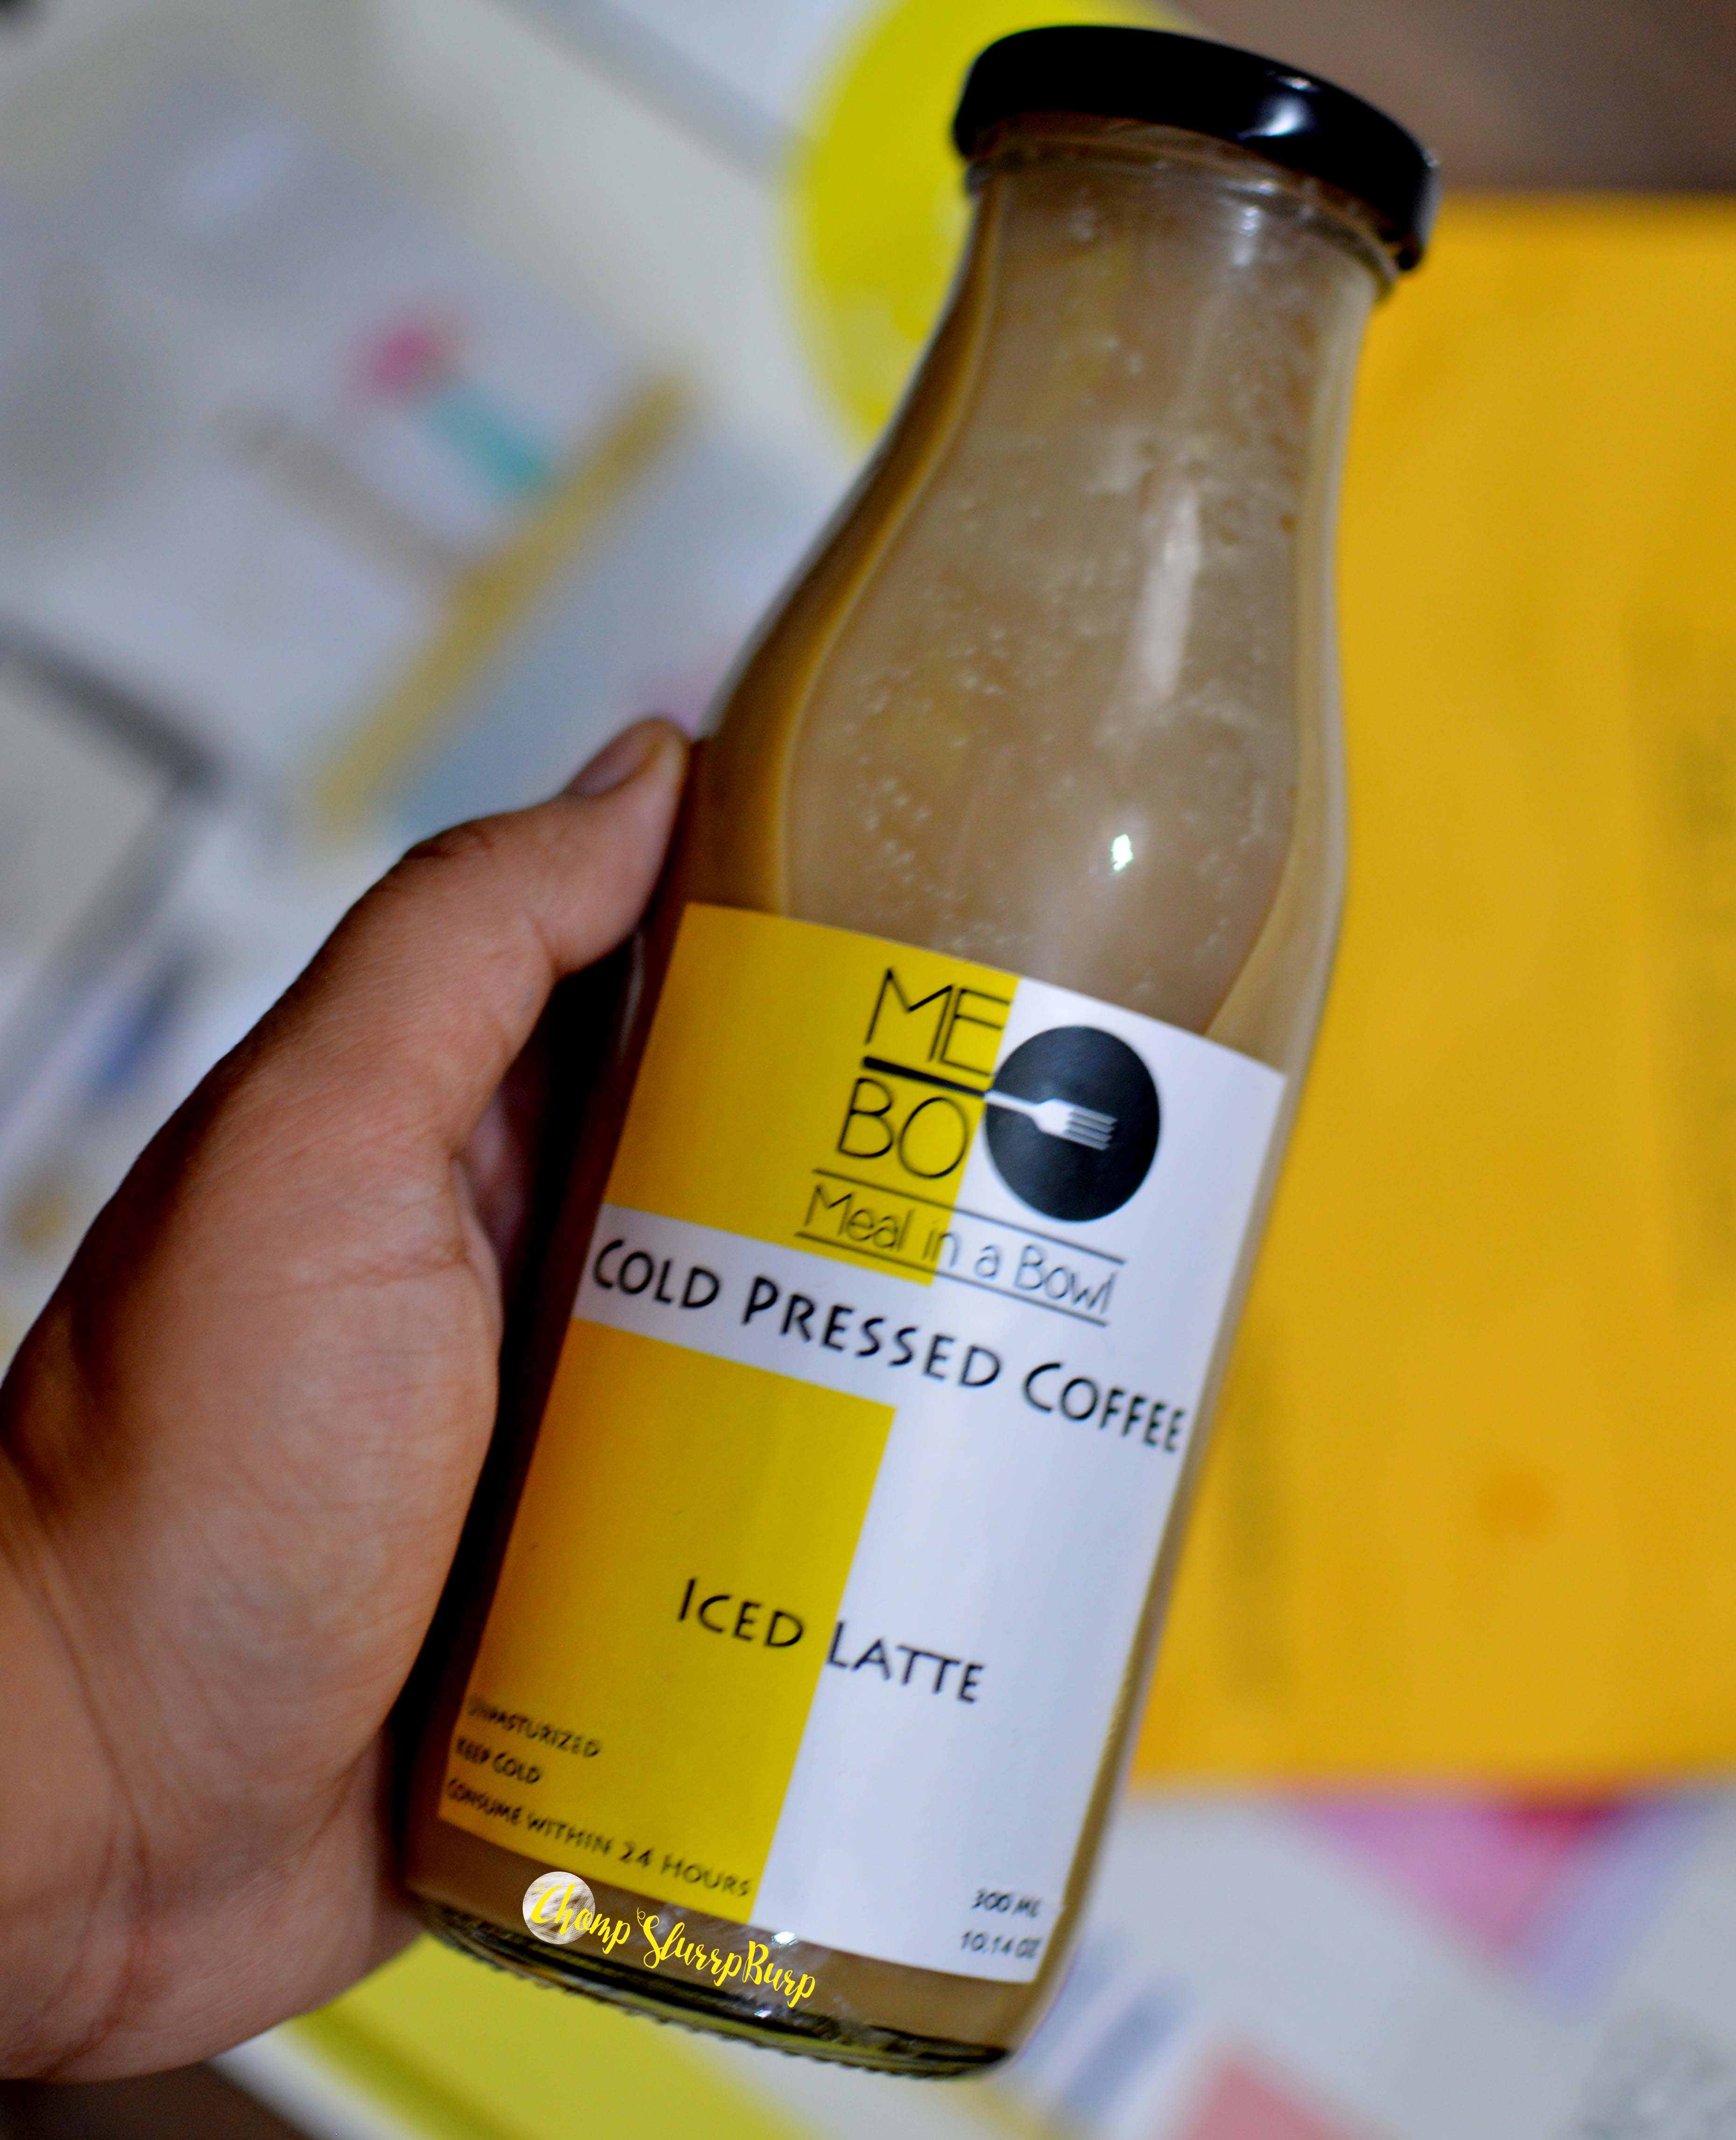 Cold pressed coffee